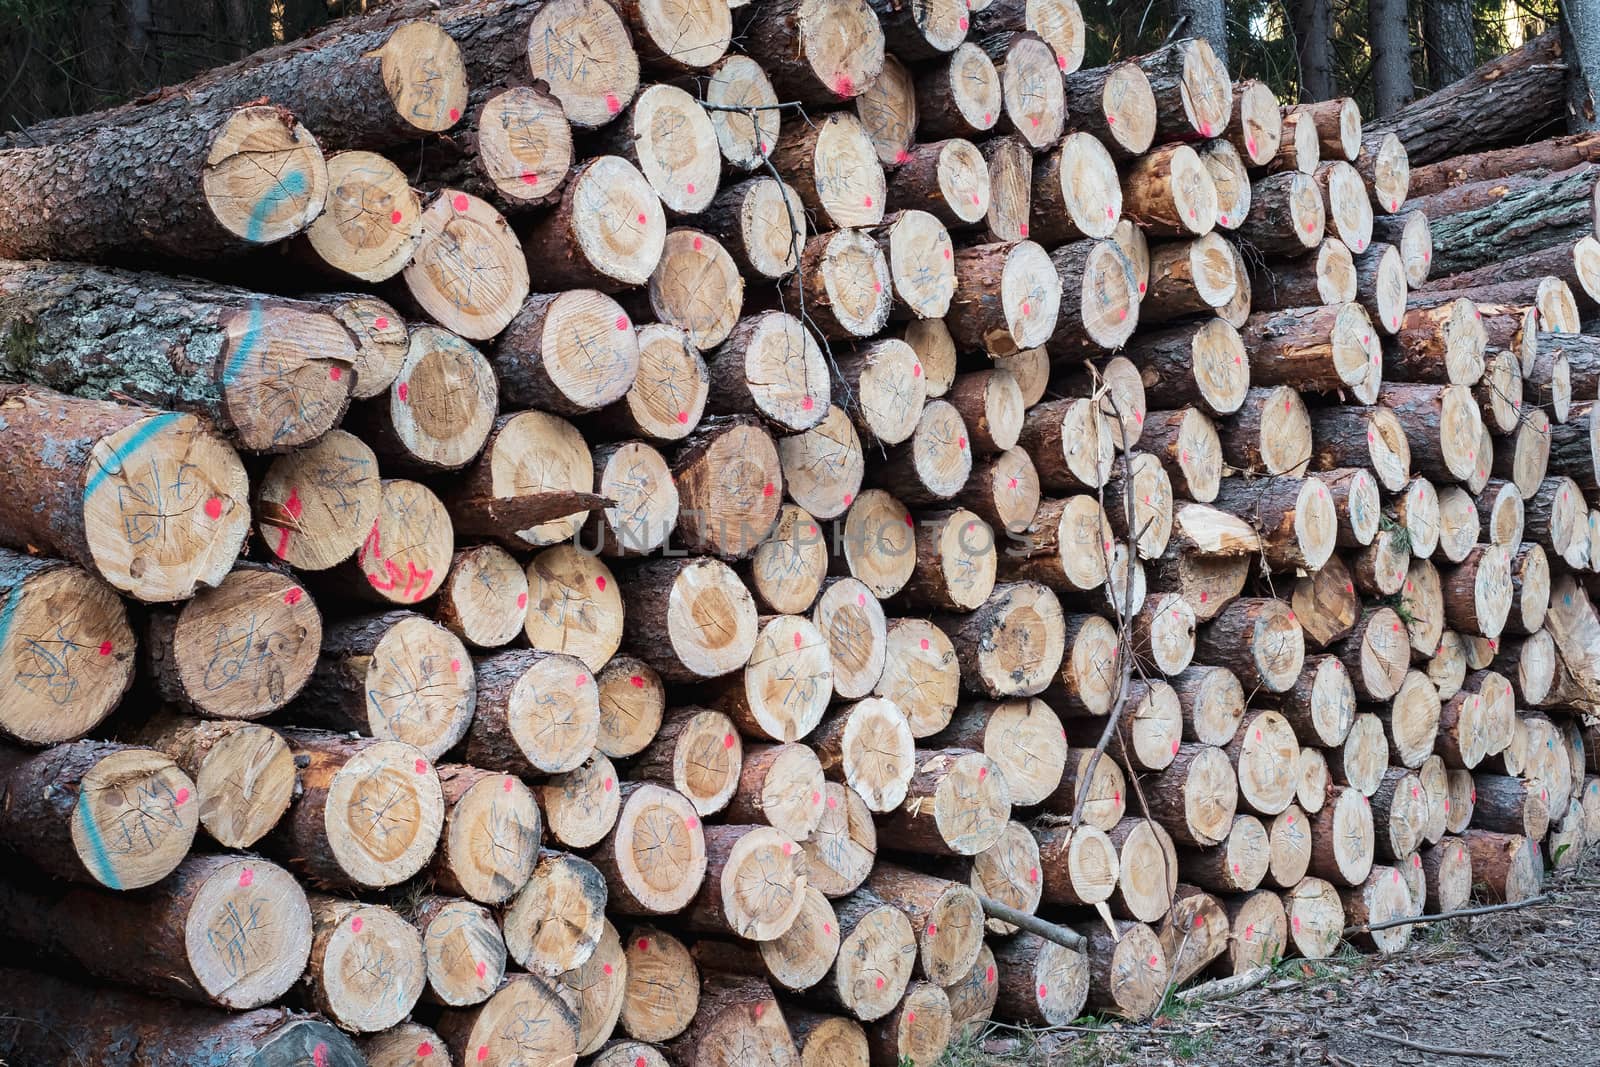 Pile of wood. A view of huge stacks of logs. by xtrekx